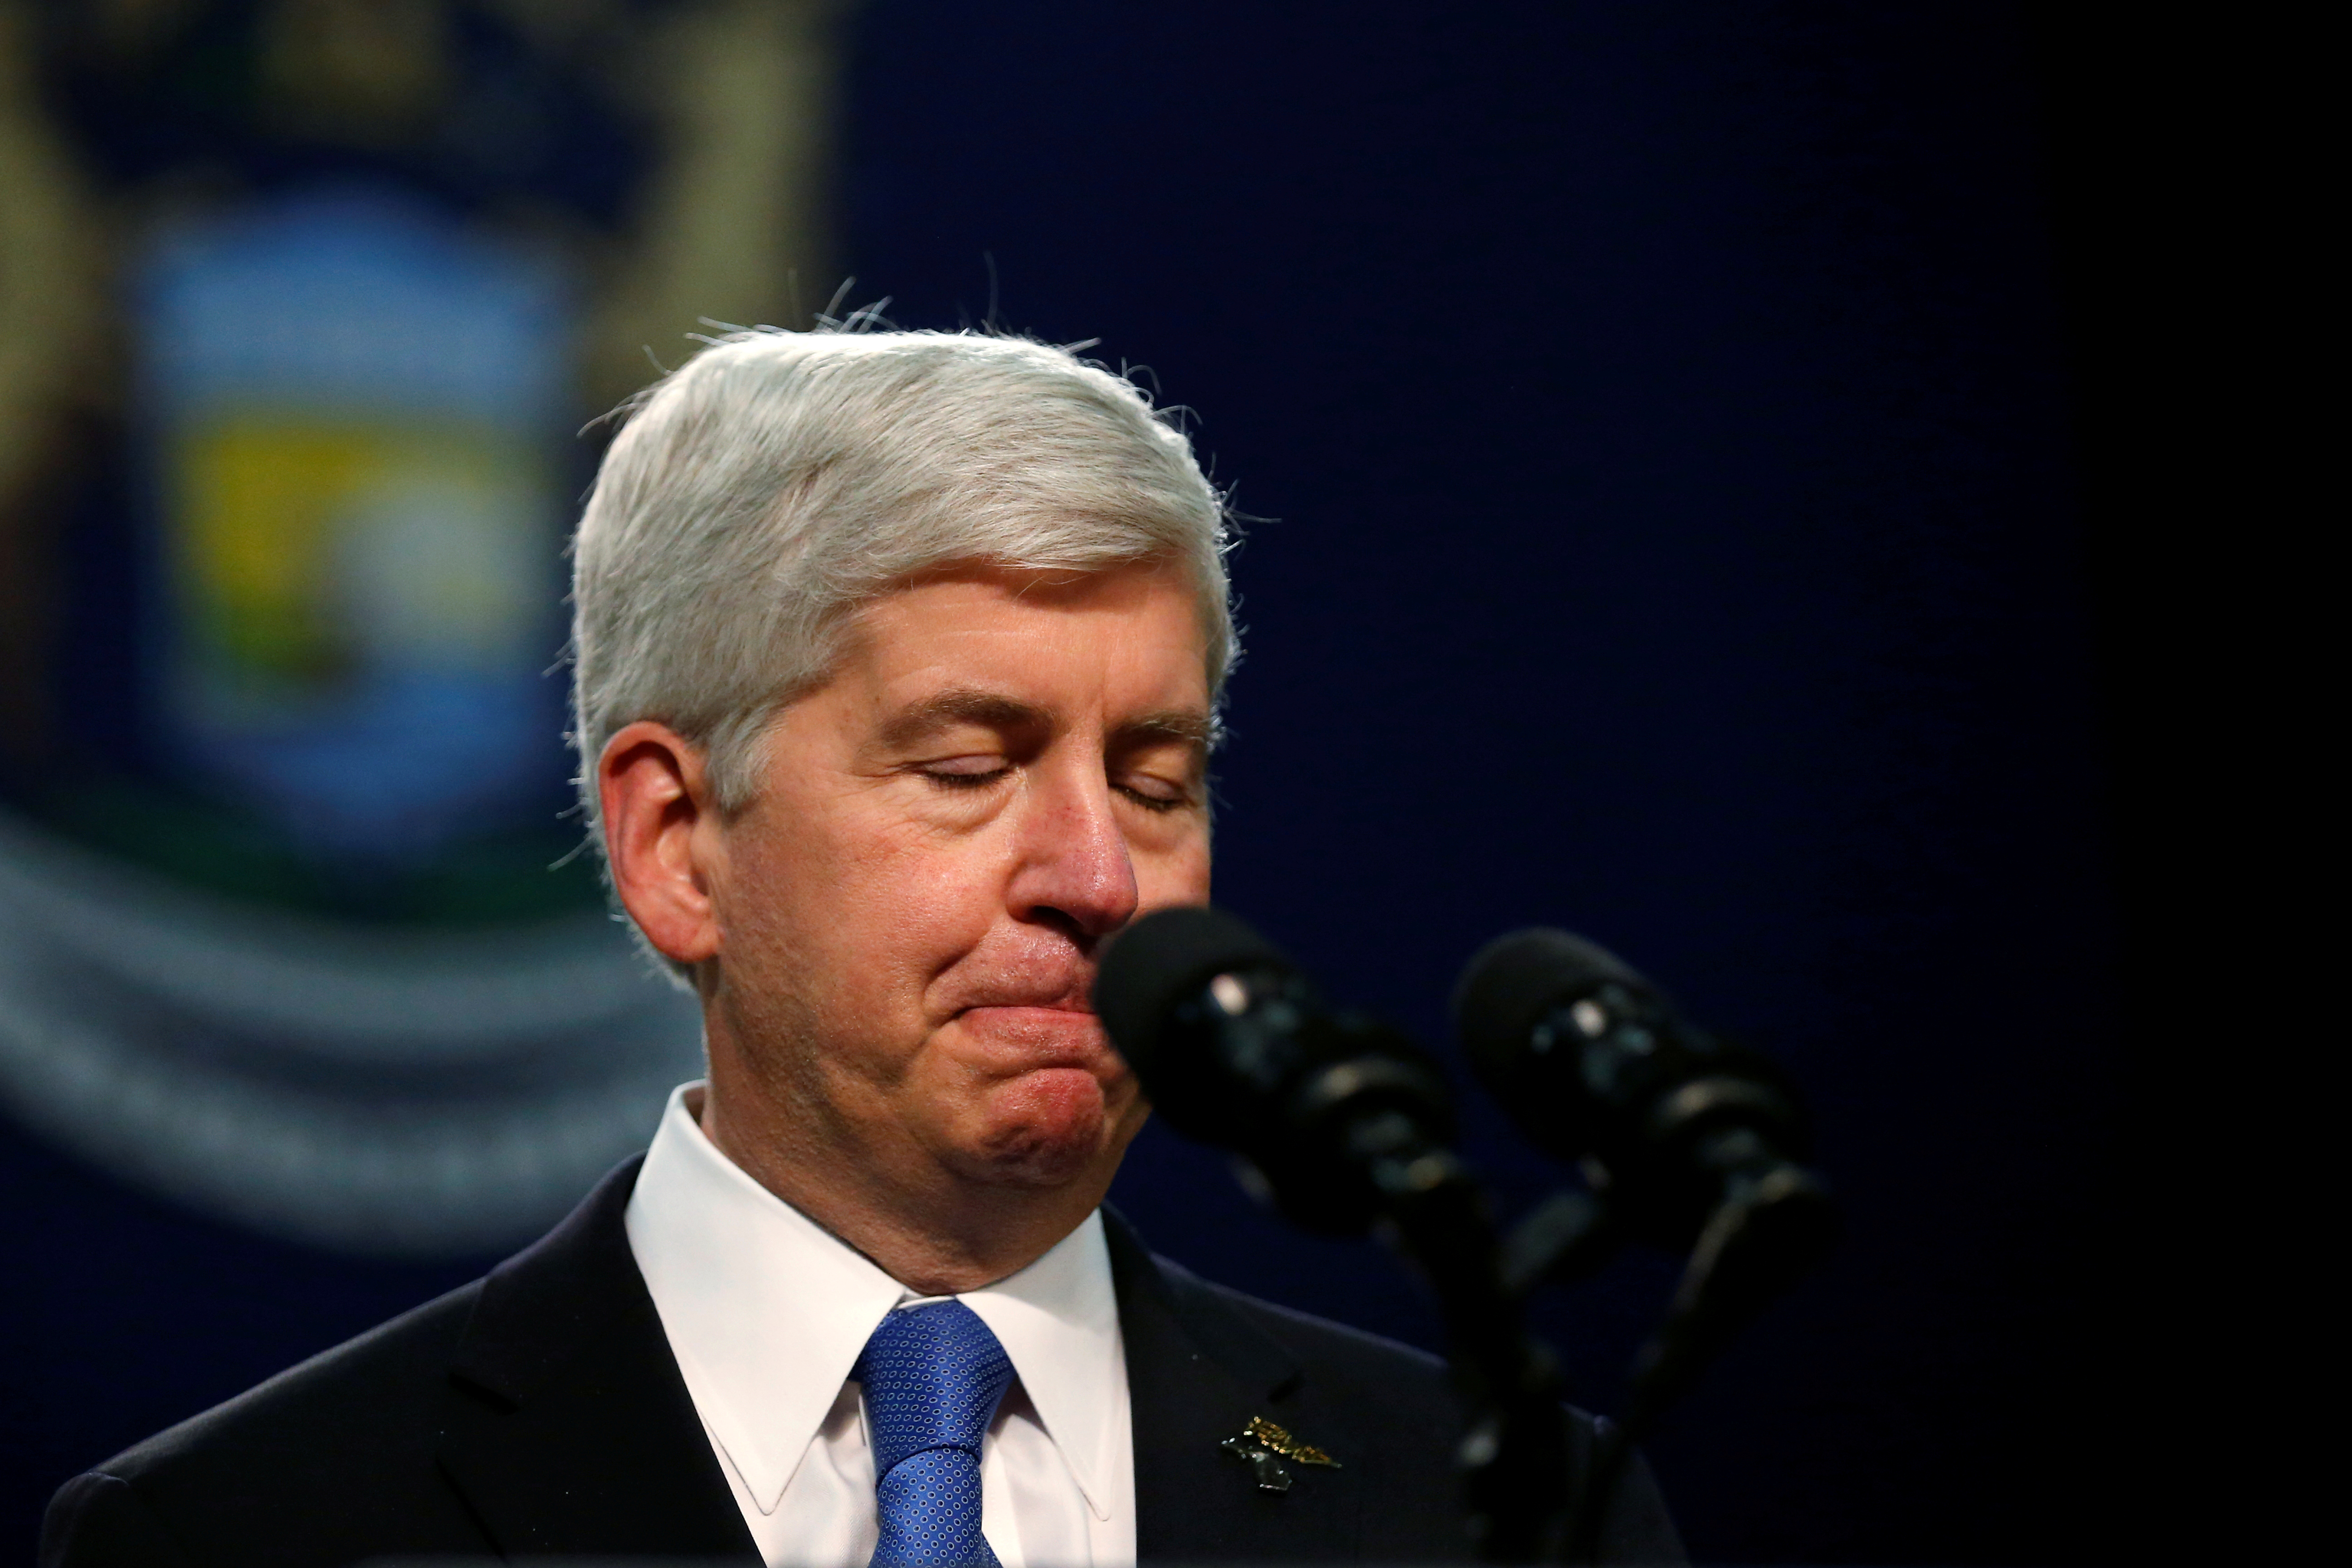 Michigan Governor Rick Snyder pauses as he speaks at North Western High School in Flint, a city struggling with the effects of lead-poisoned drinking water in Michigan